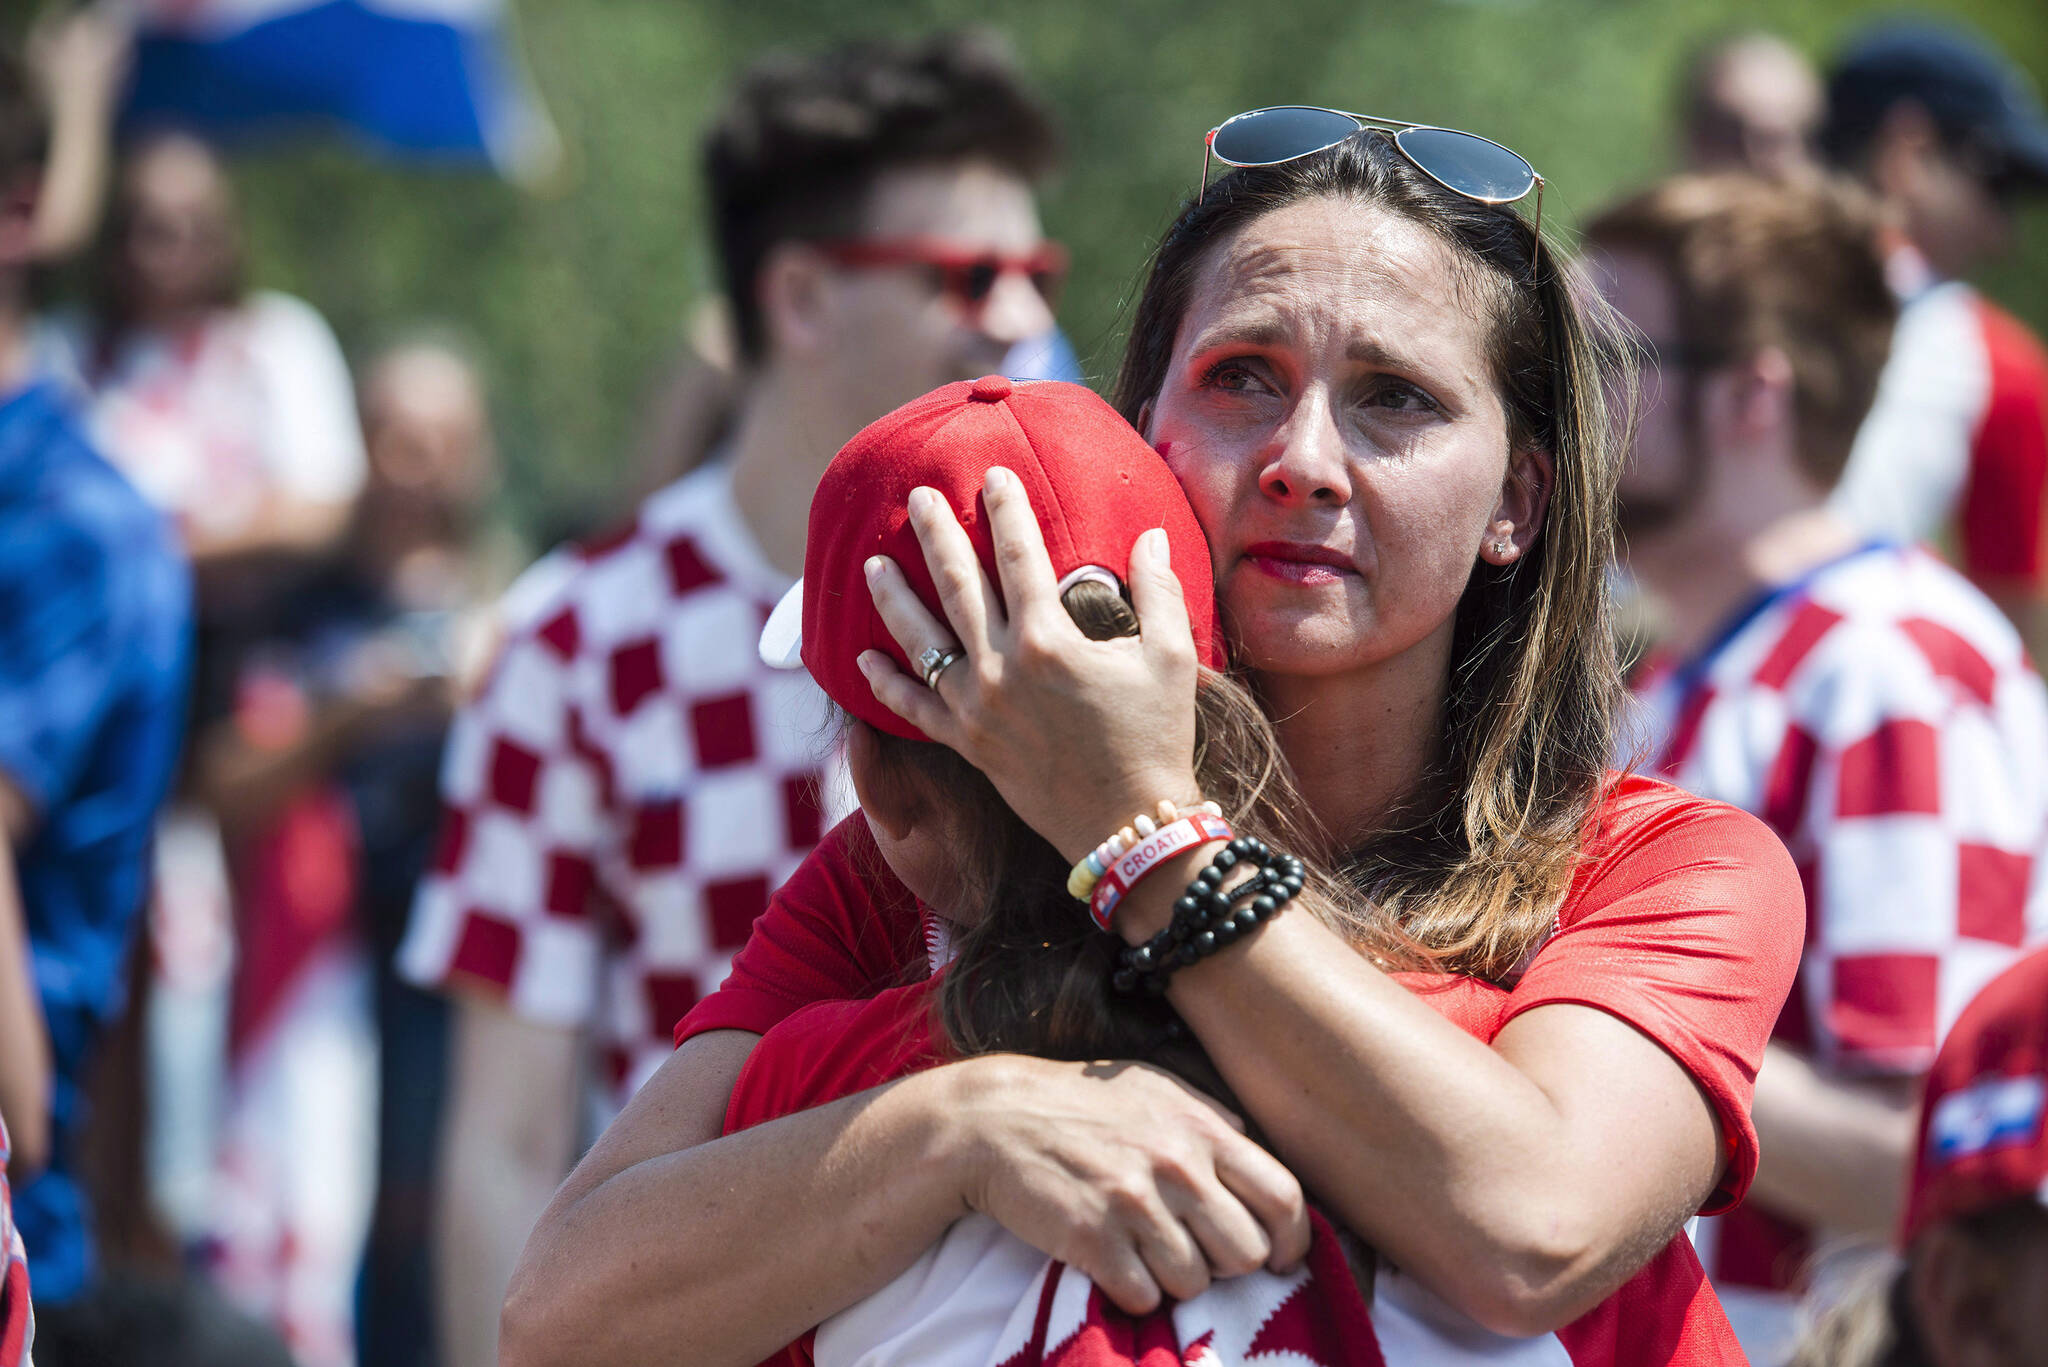 Croatia soccer fans react during a live screening of the 2018 FIFA World Cup final between France and Croatia, in Our Lady Queen-Croatia park in Mississauga, Ont. on Sunday, July 15, 2018. THE CANADIAN PRESS/Christopher Katsarov